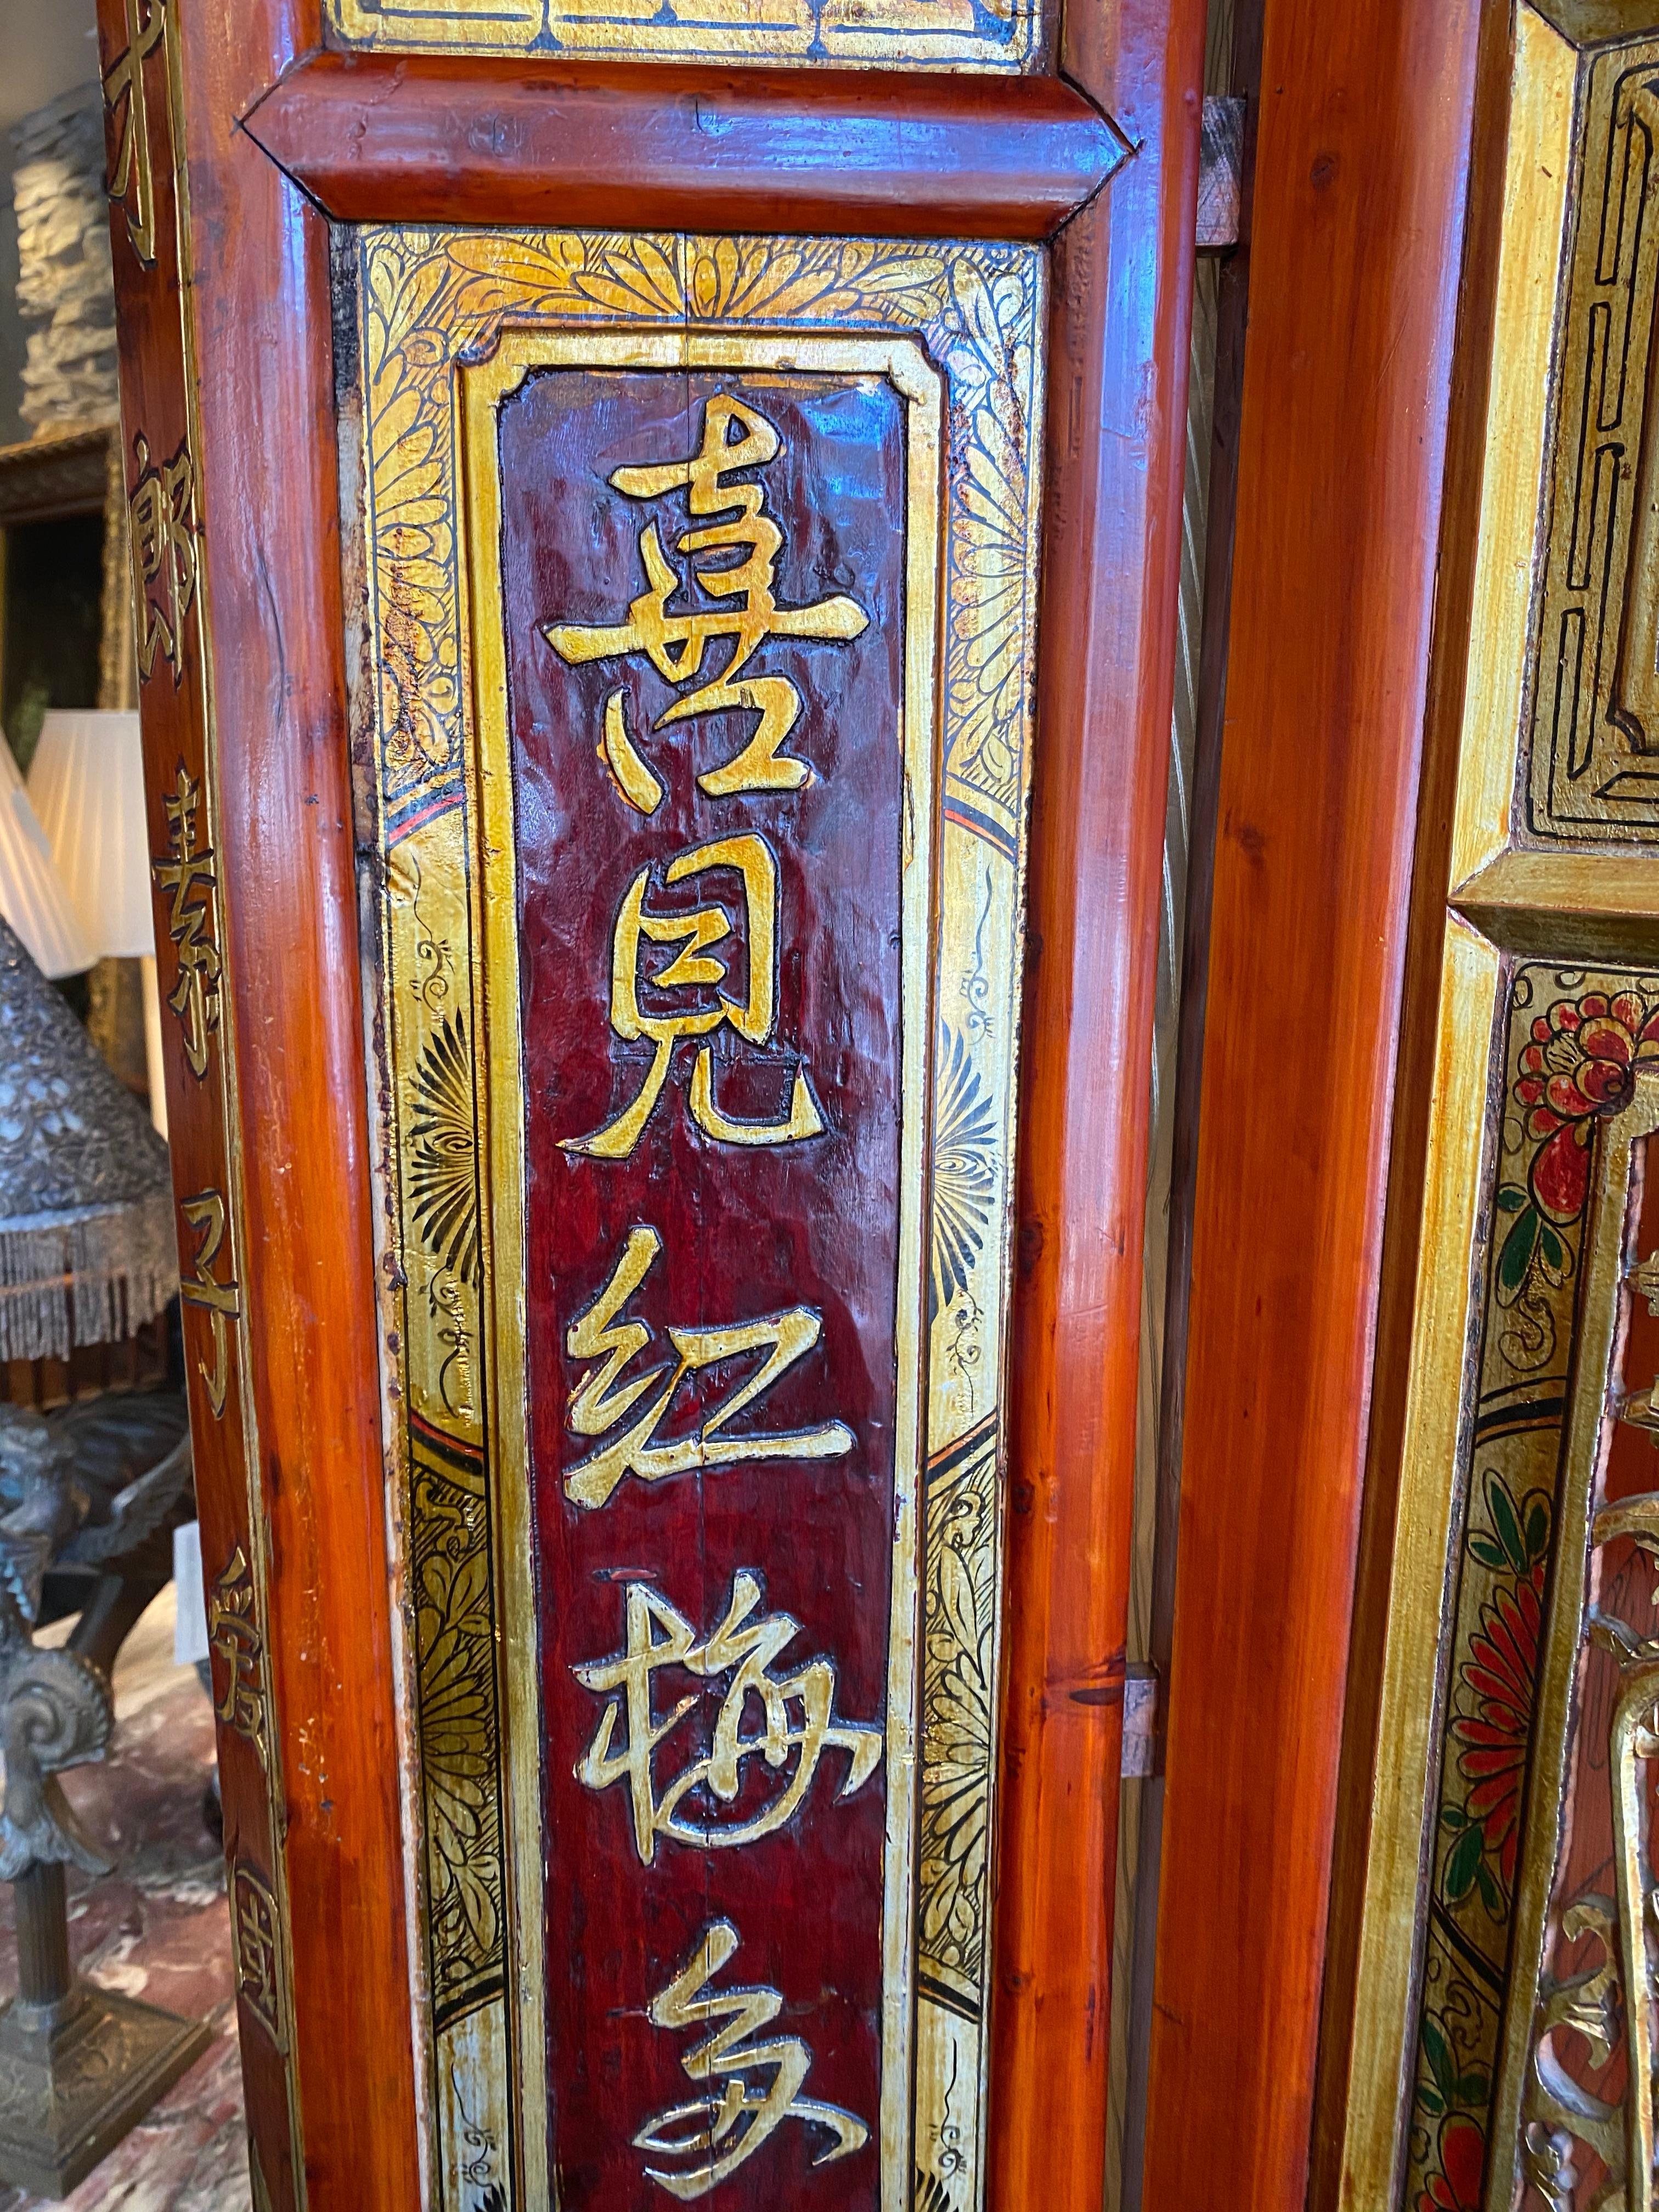 RELAX!  Be in your own world! This 125 year old Chinese wedding bed is something different. Think back so many years ago. It was the very wealth and the not. This was hand made for a very wealth family having red lacquer intricate hand carving